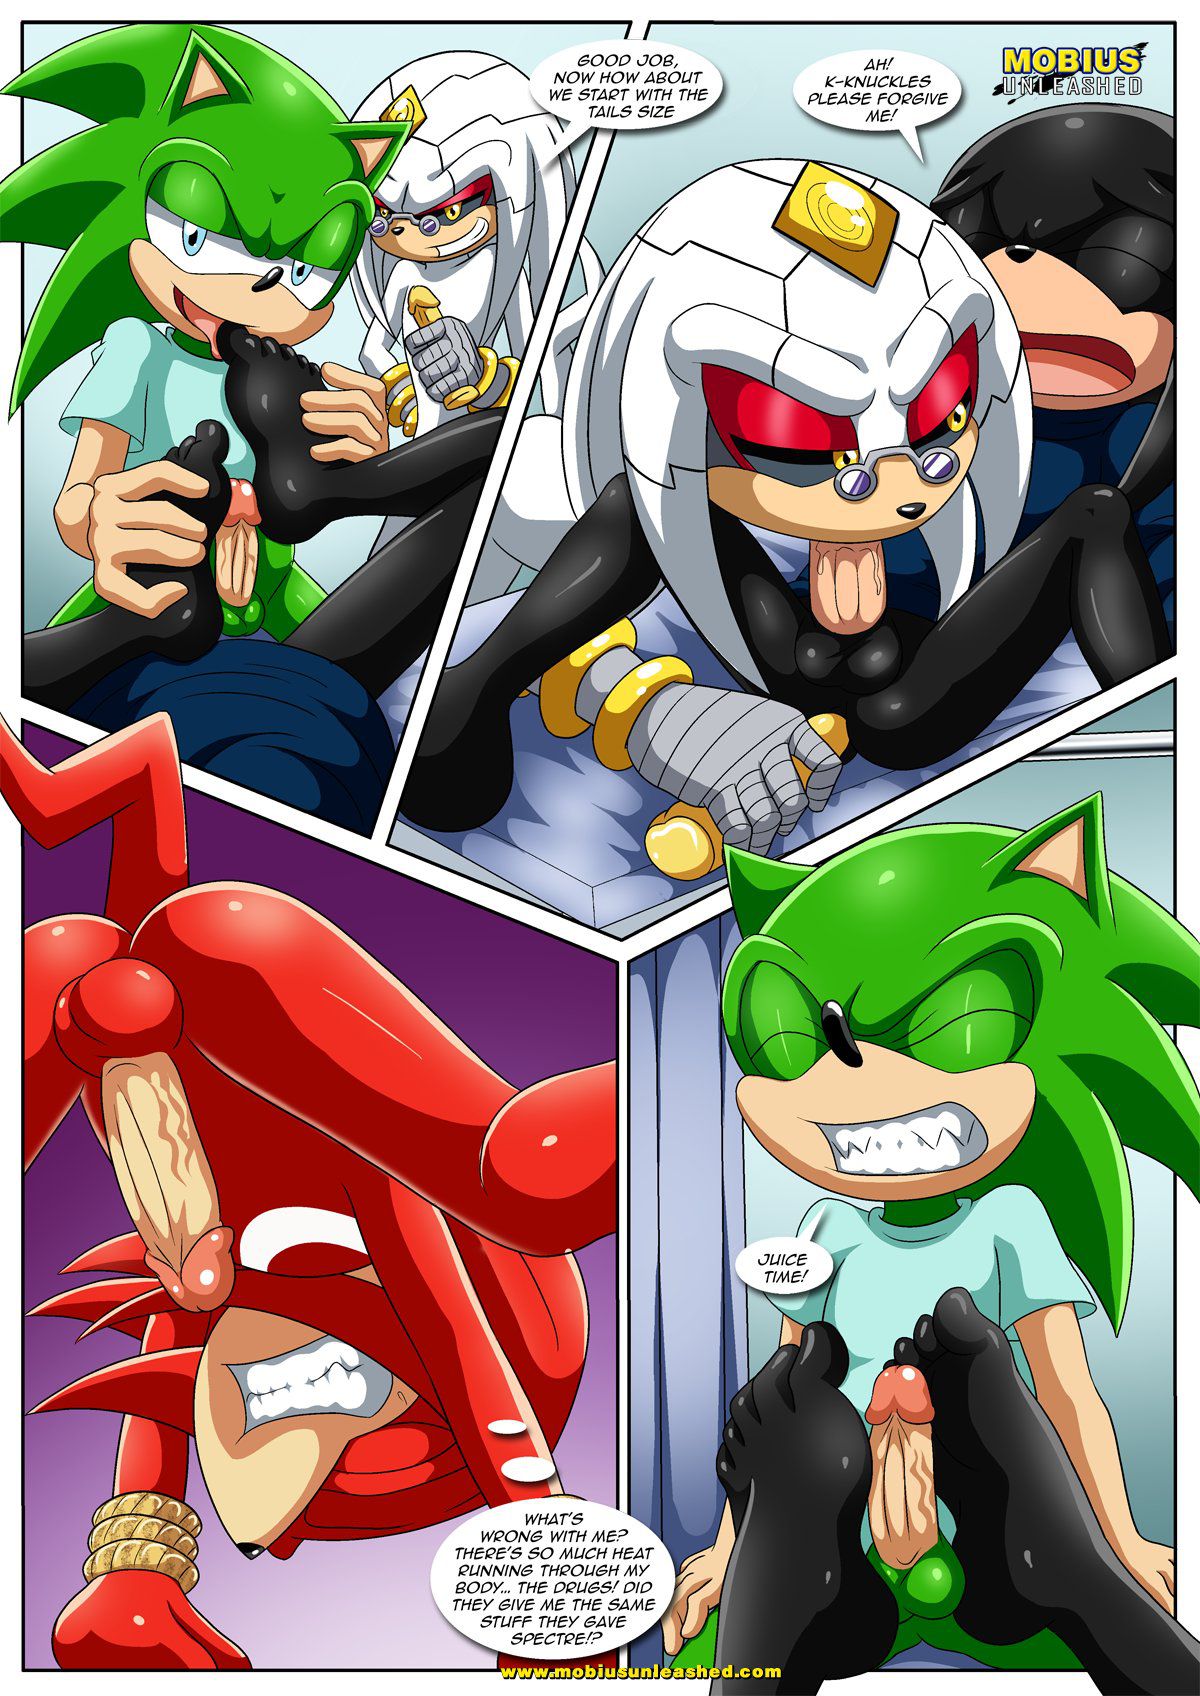 [Palcomix] The Doctor Will See You Now 2 (Sonic The Hedgehog) [Ongoing] 4